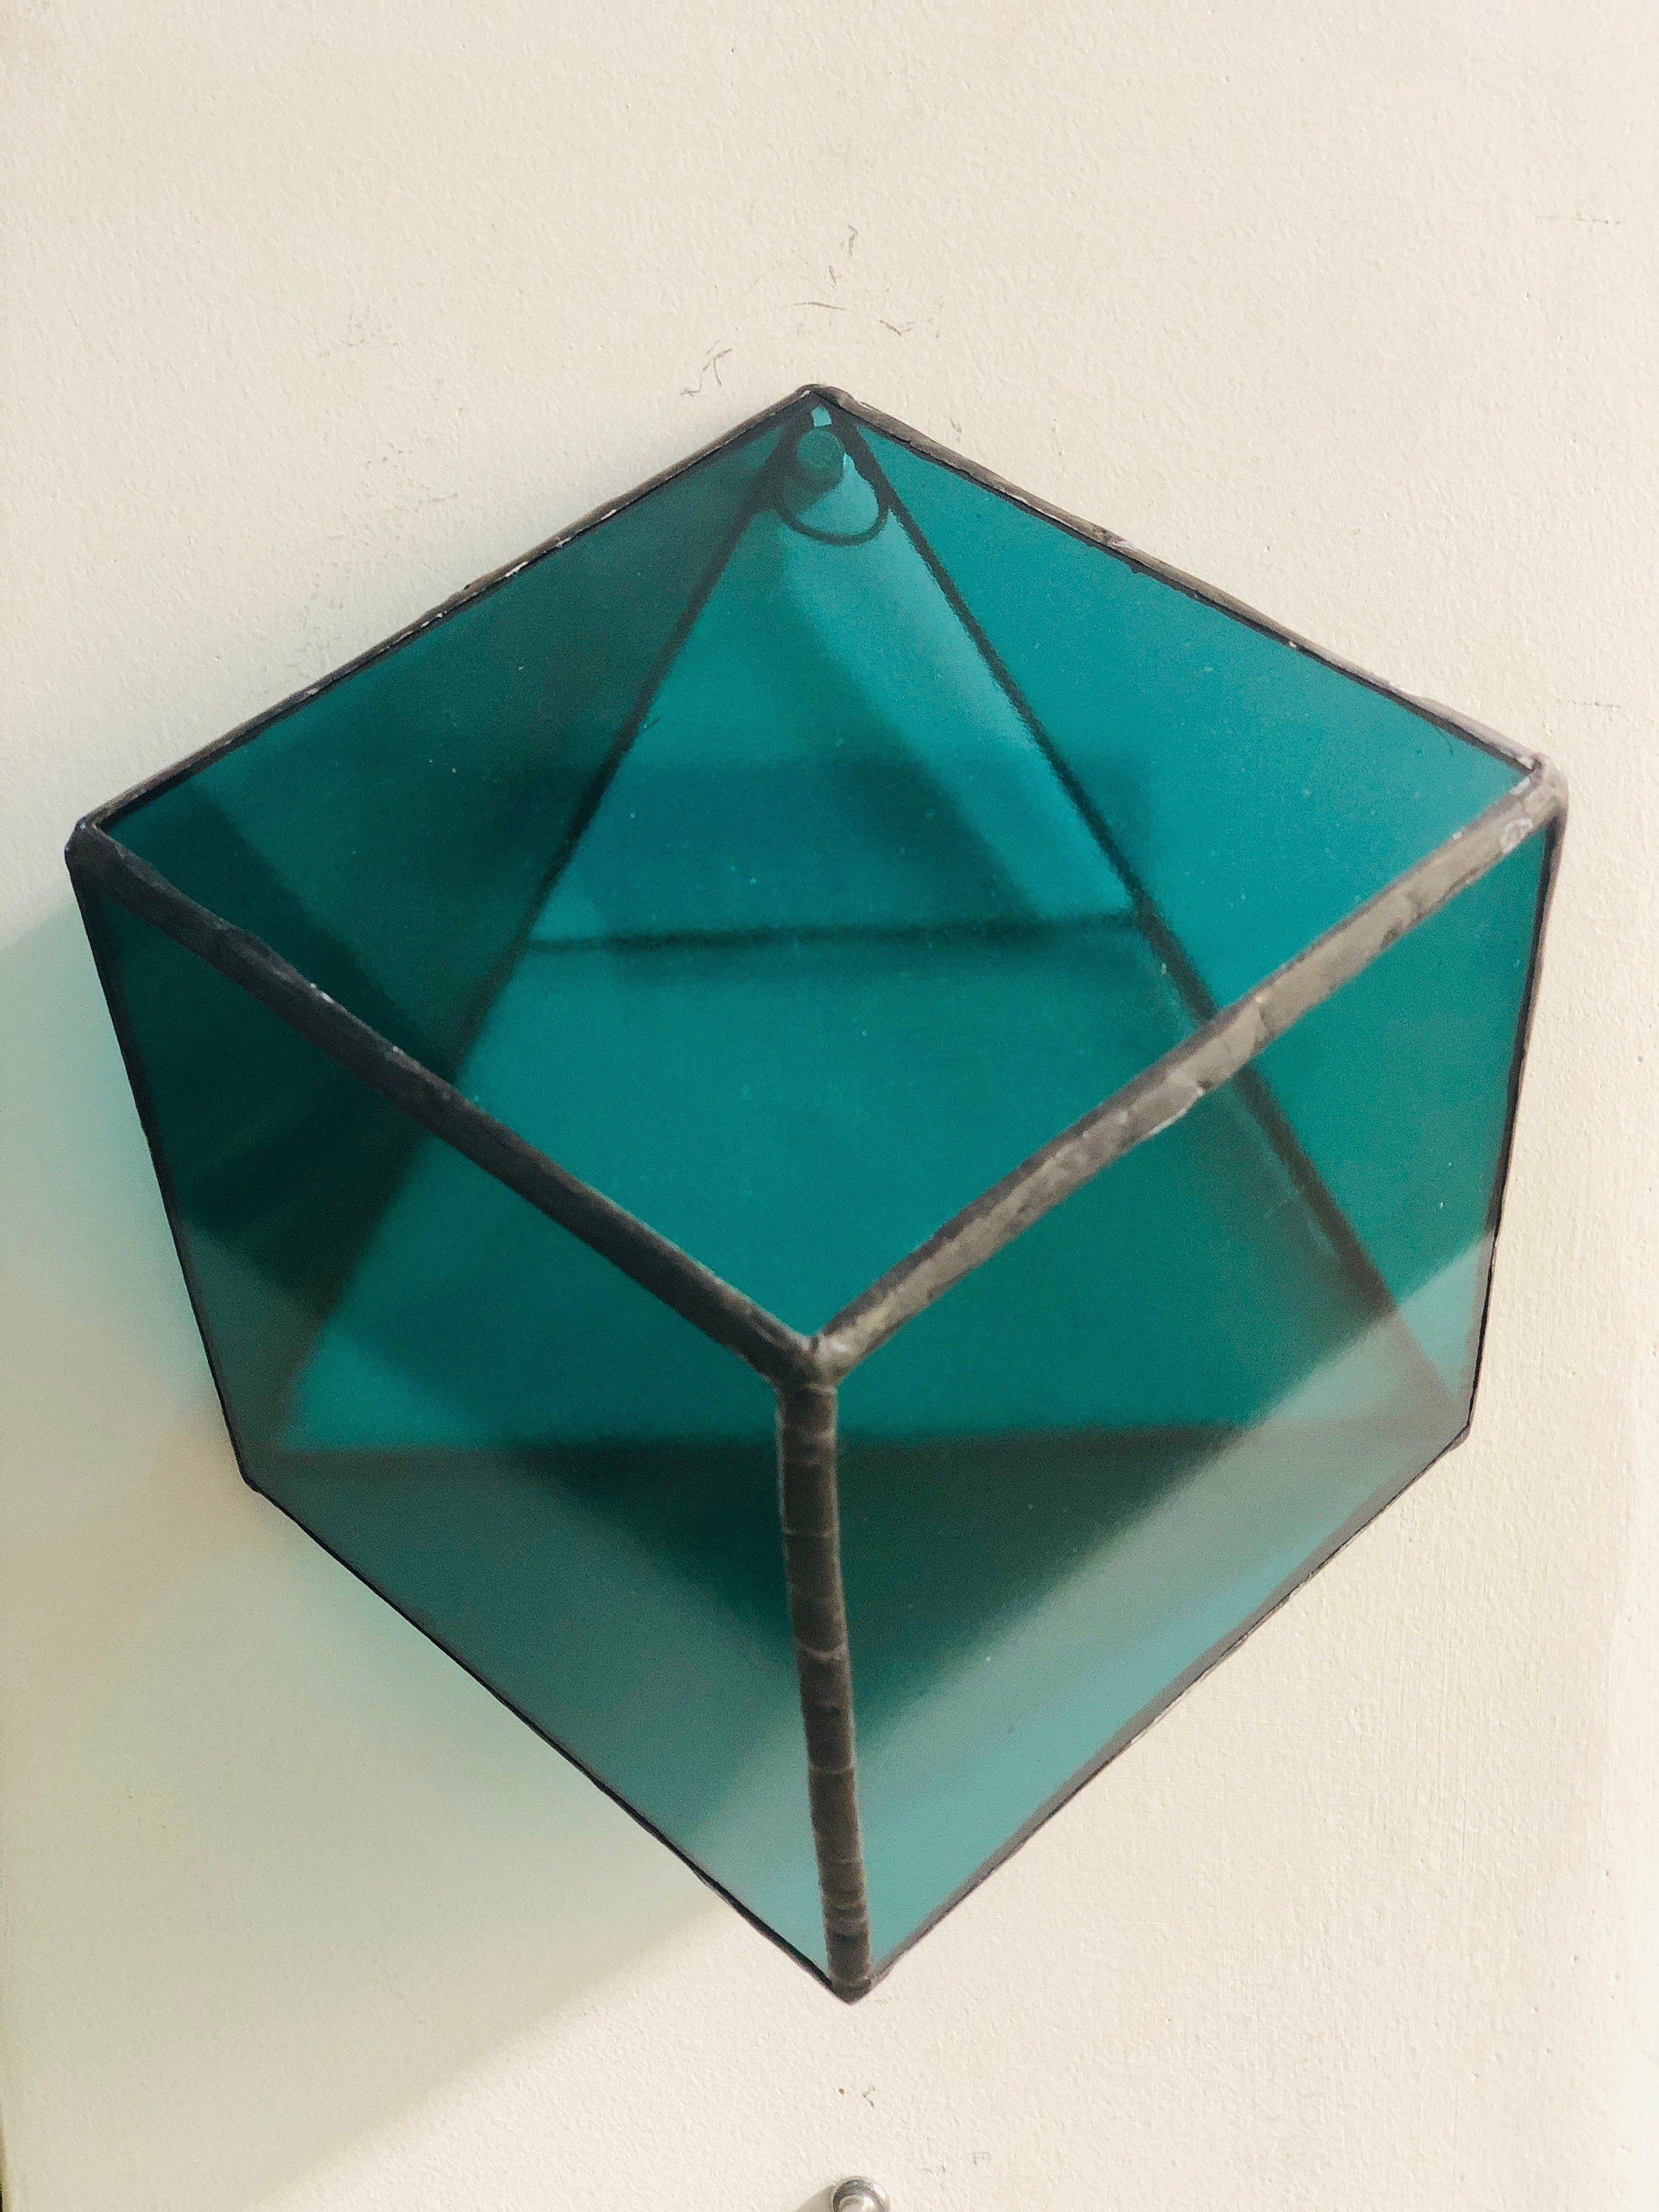 Stained green transparent glass 3D geometric cube wall or table top decoration Sculpture Tiffany technique - Large, Platonic Solid